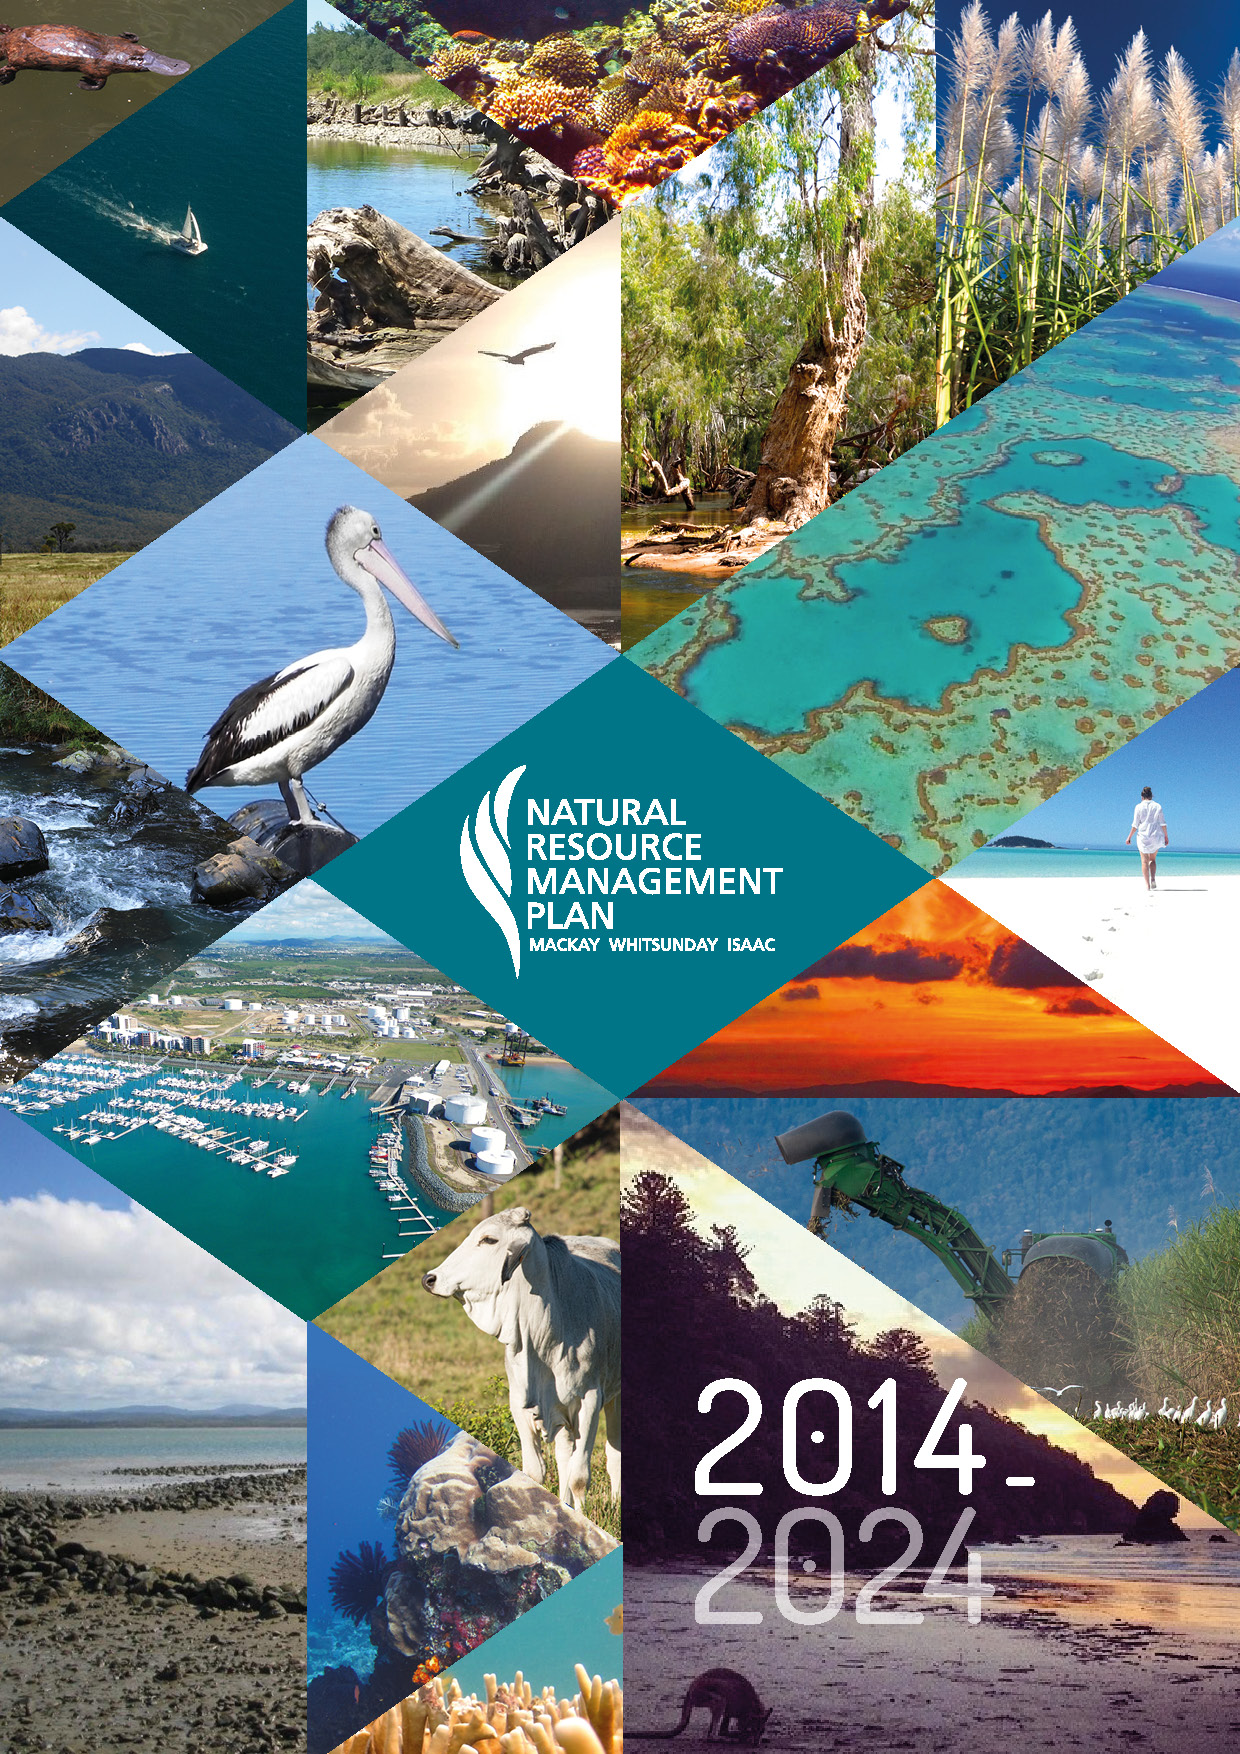 Cover for NRM plan 2014 to 2024.